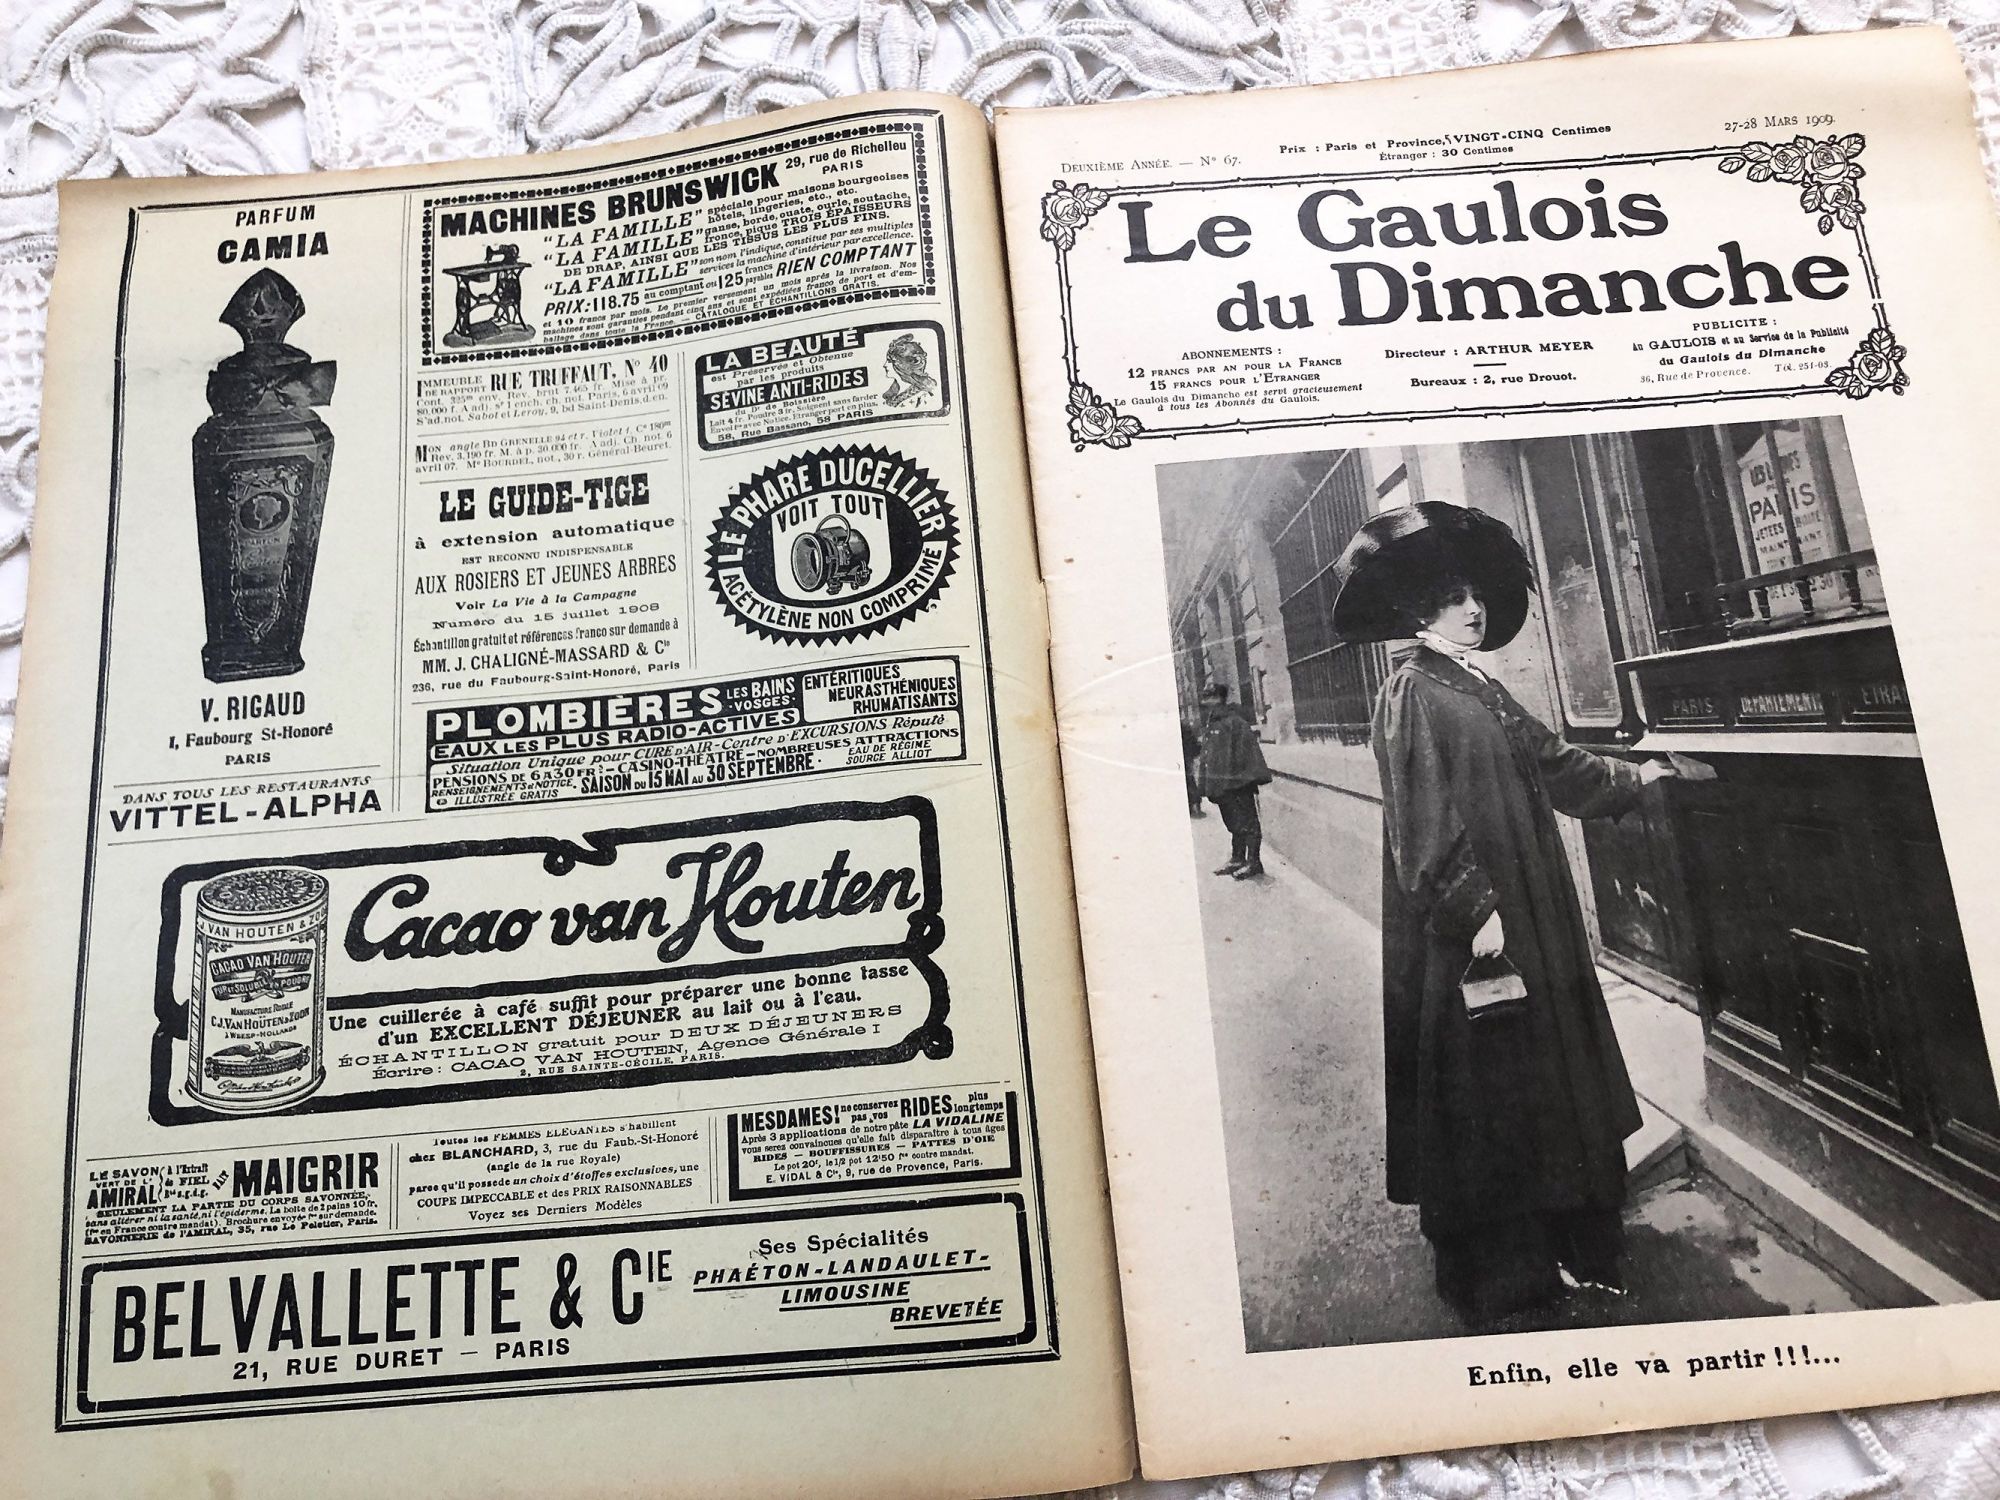 French weekly newspaper "Le Gaulois du Dimanche" of March 1909 with engravings, photos, advertising, music sheet, articles, etc.